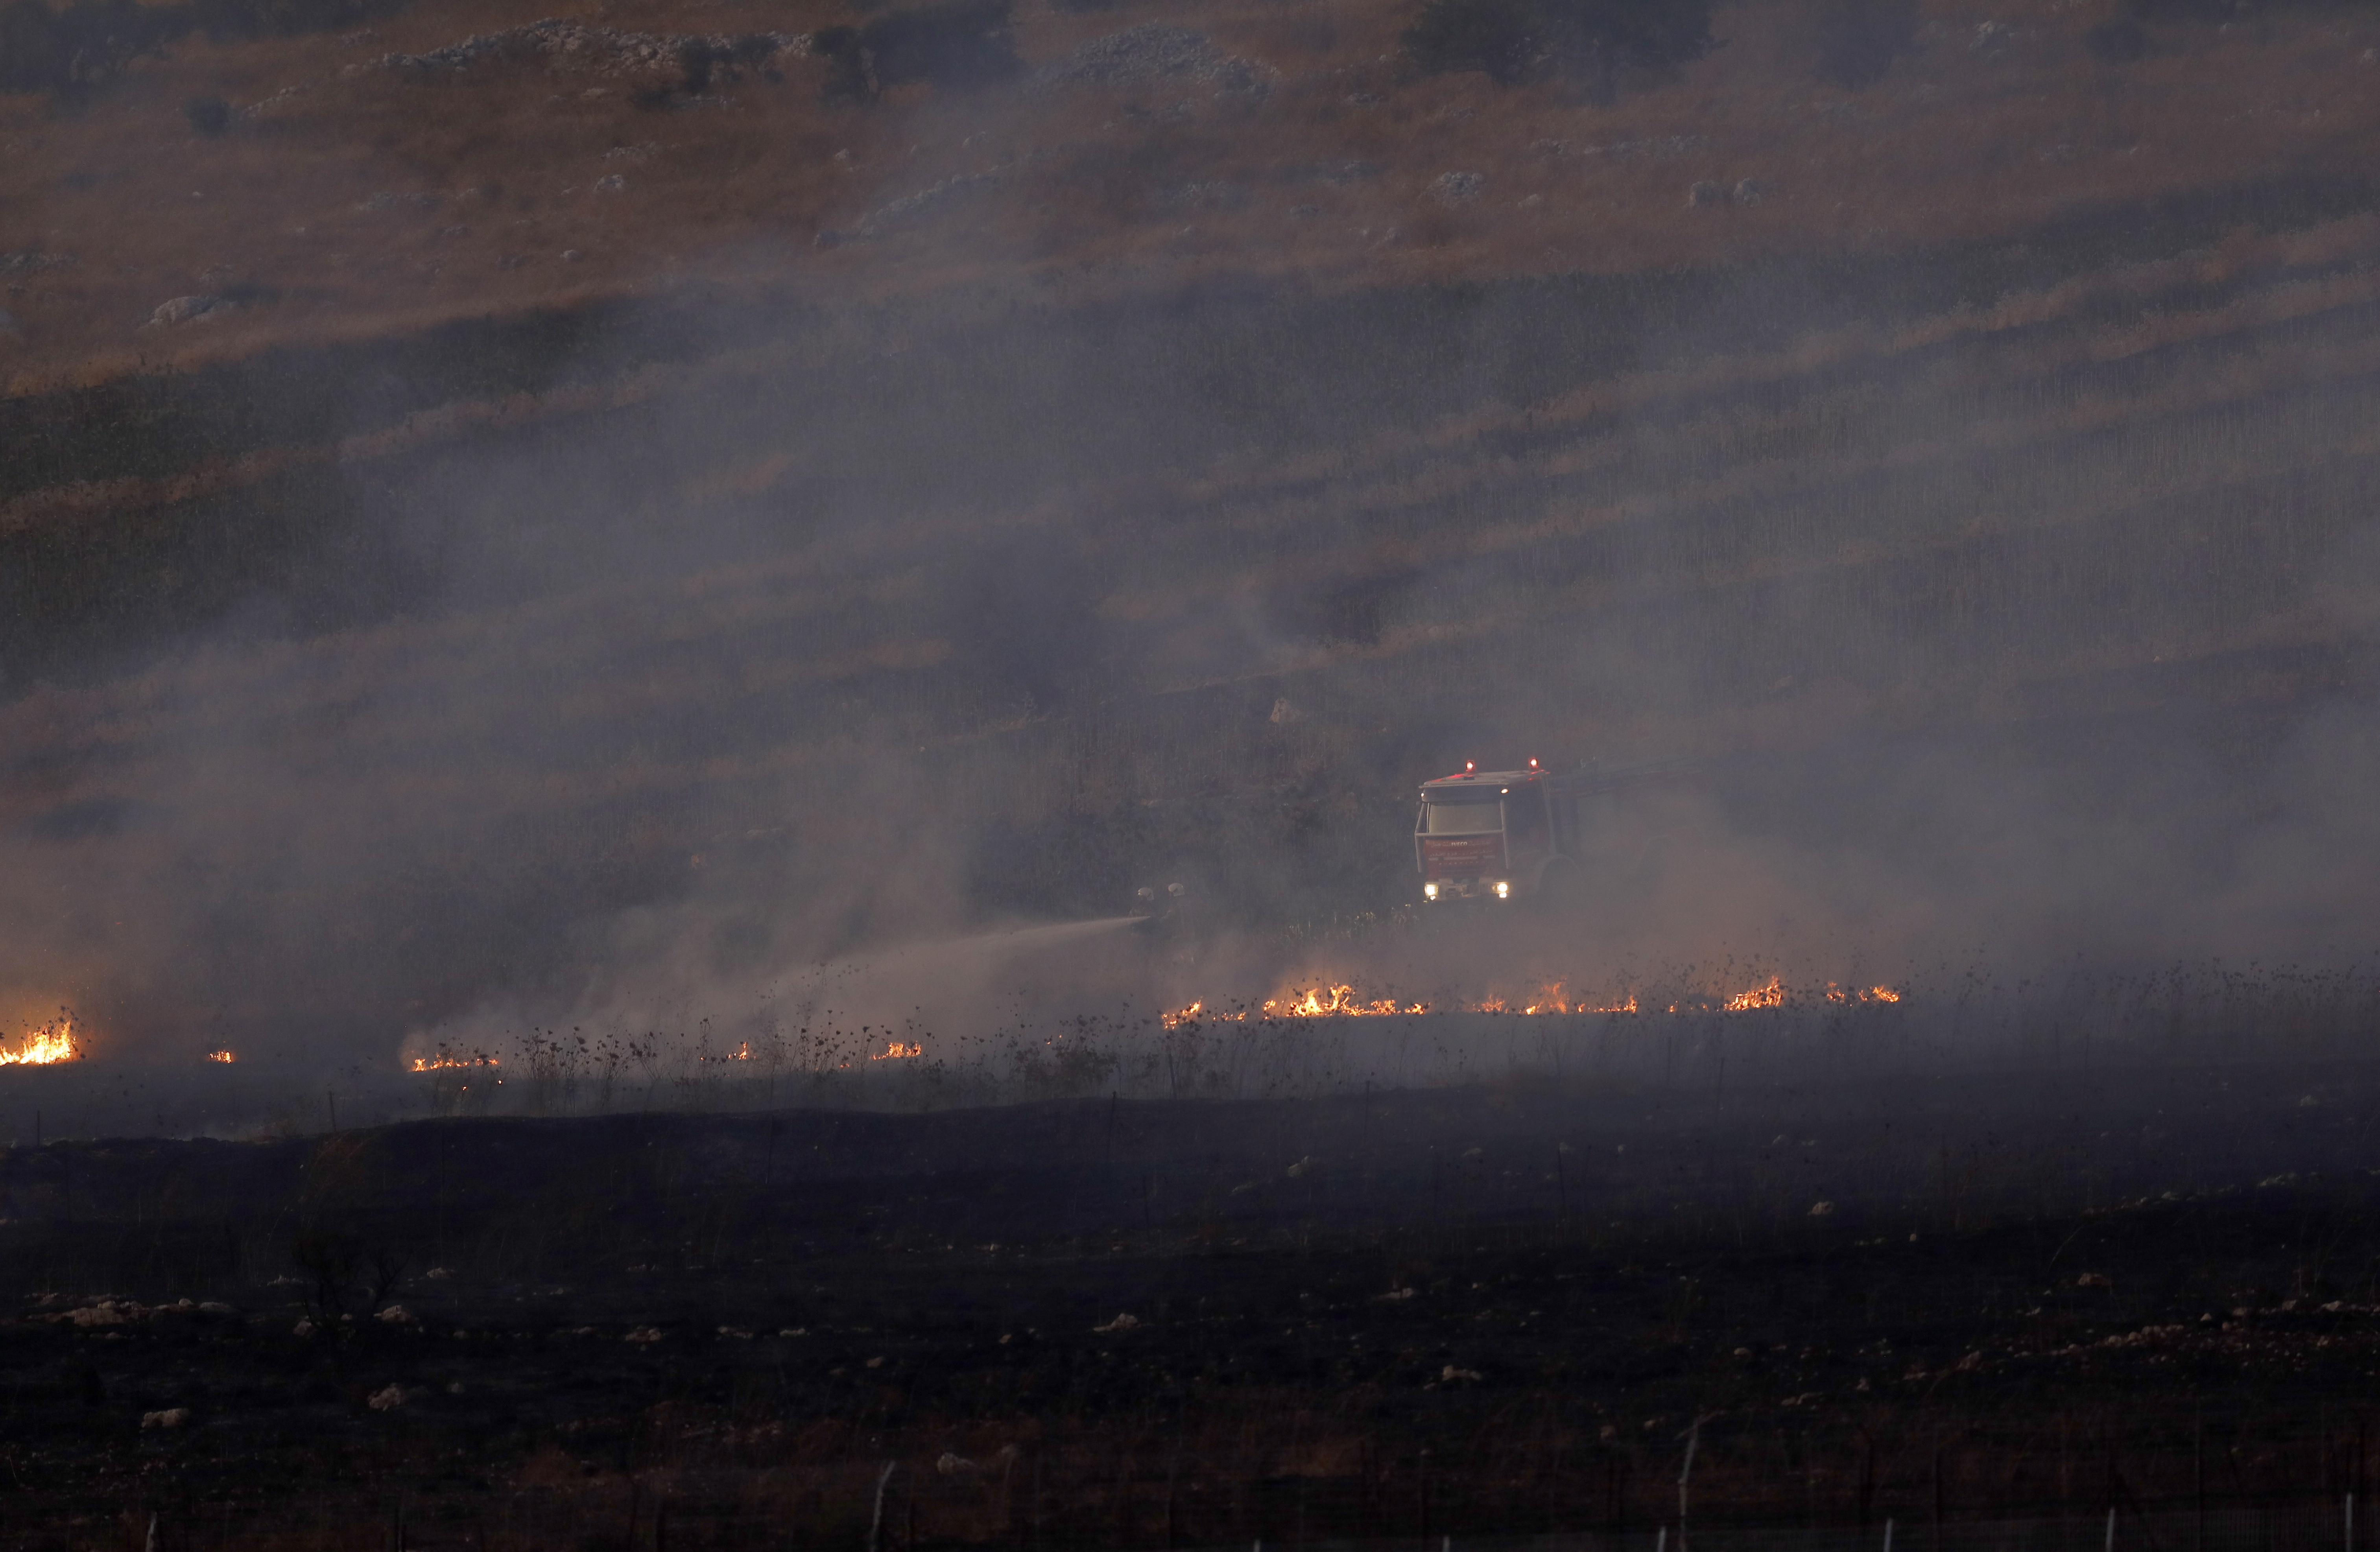 epa07811184 Lebanese firefighters extinguish the fire caused by Israeli shell as seen from the Israeli side of the border near the village of  village of Avivim, 01 September 2019. According to reports, tension between Israel and Lebanese militant group Hezbollah continues to escalate since last week following strikes on targets in Syria and Israeli drones fell over southern suburb of Beirut.  Hezbollah fired  anti-tank missile fire towards an Israeli army  base next to  the village of Avivim on the Israeli-Lebanese  border with no injured , in  responded Israeli army  launching approximately 100 artillery shells at the sources of the fire.  EPA/ATEF SAFADI